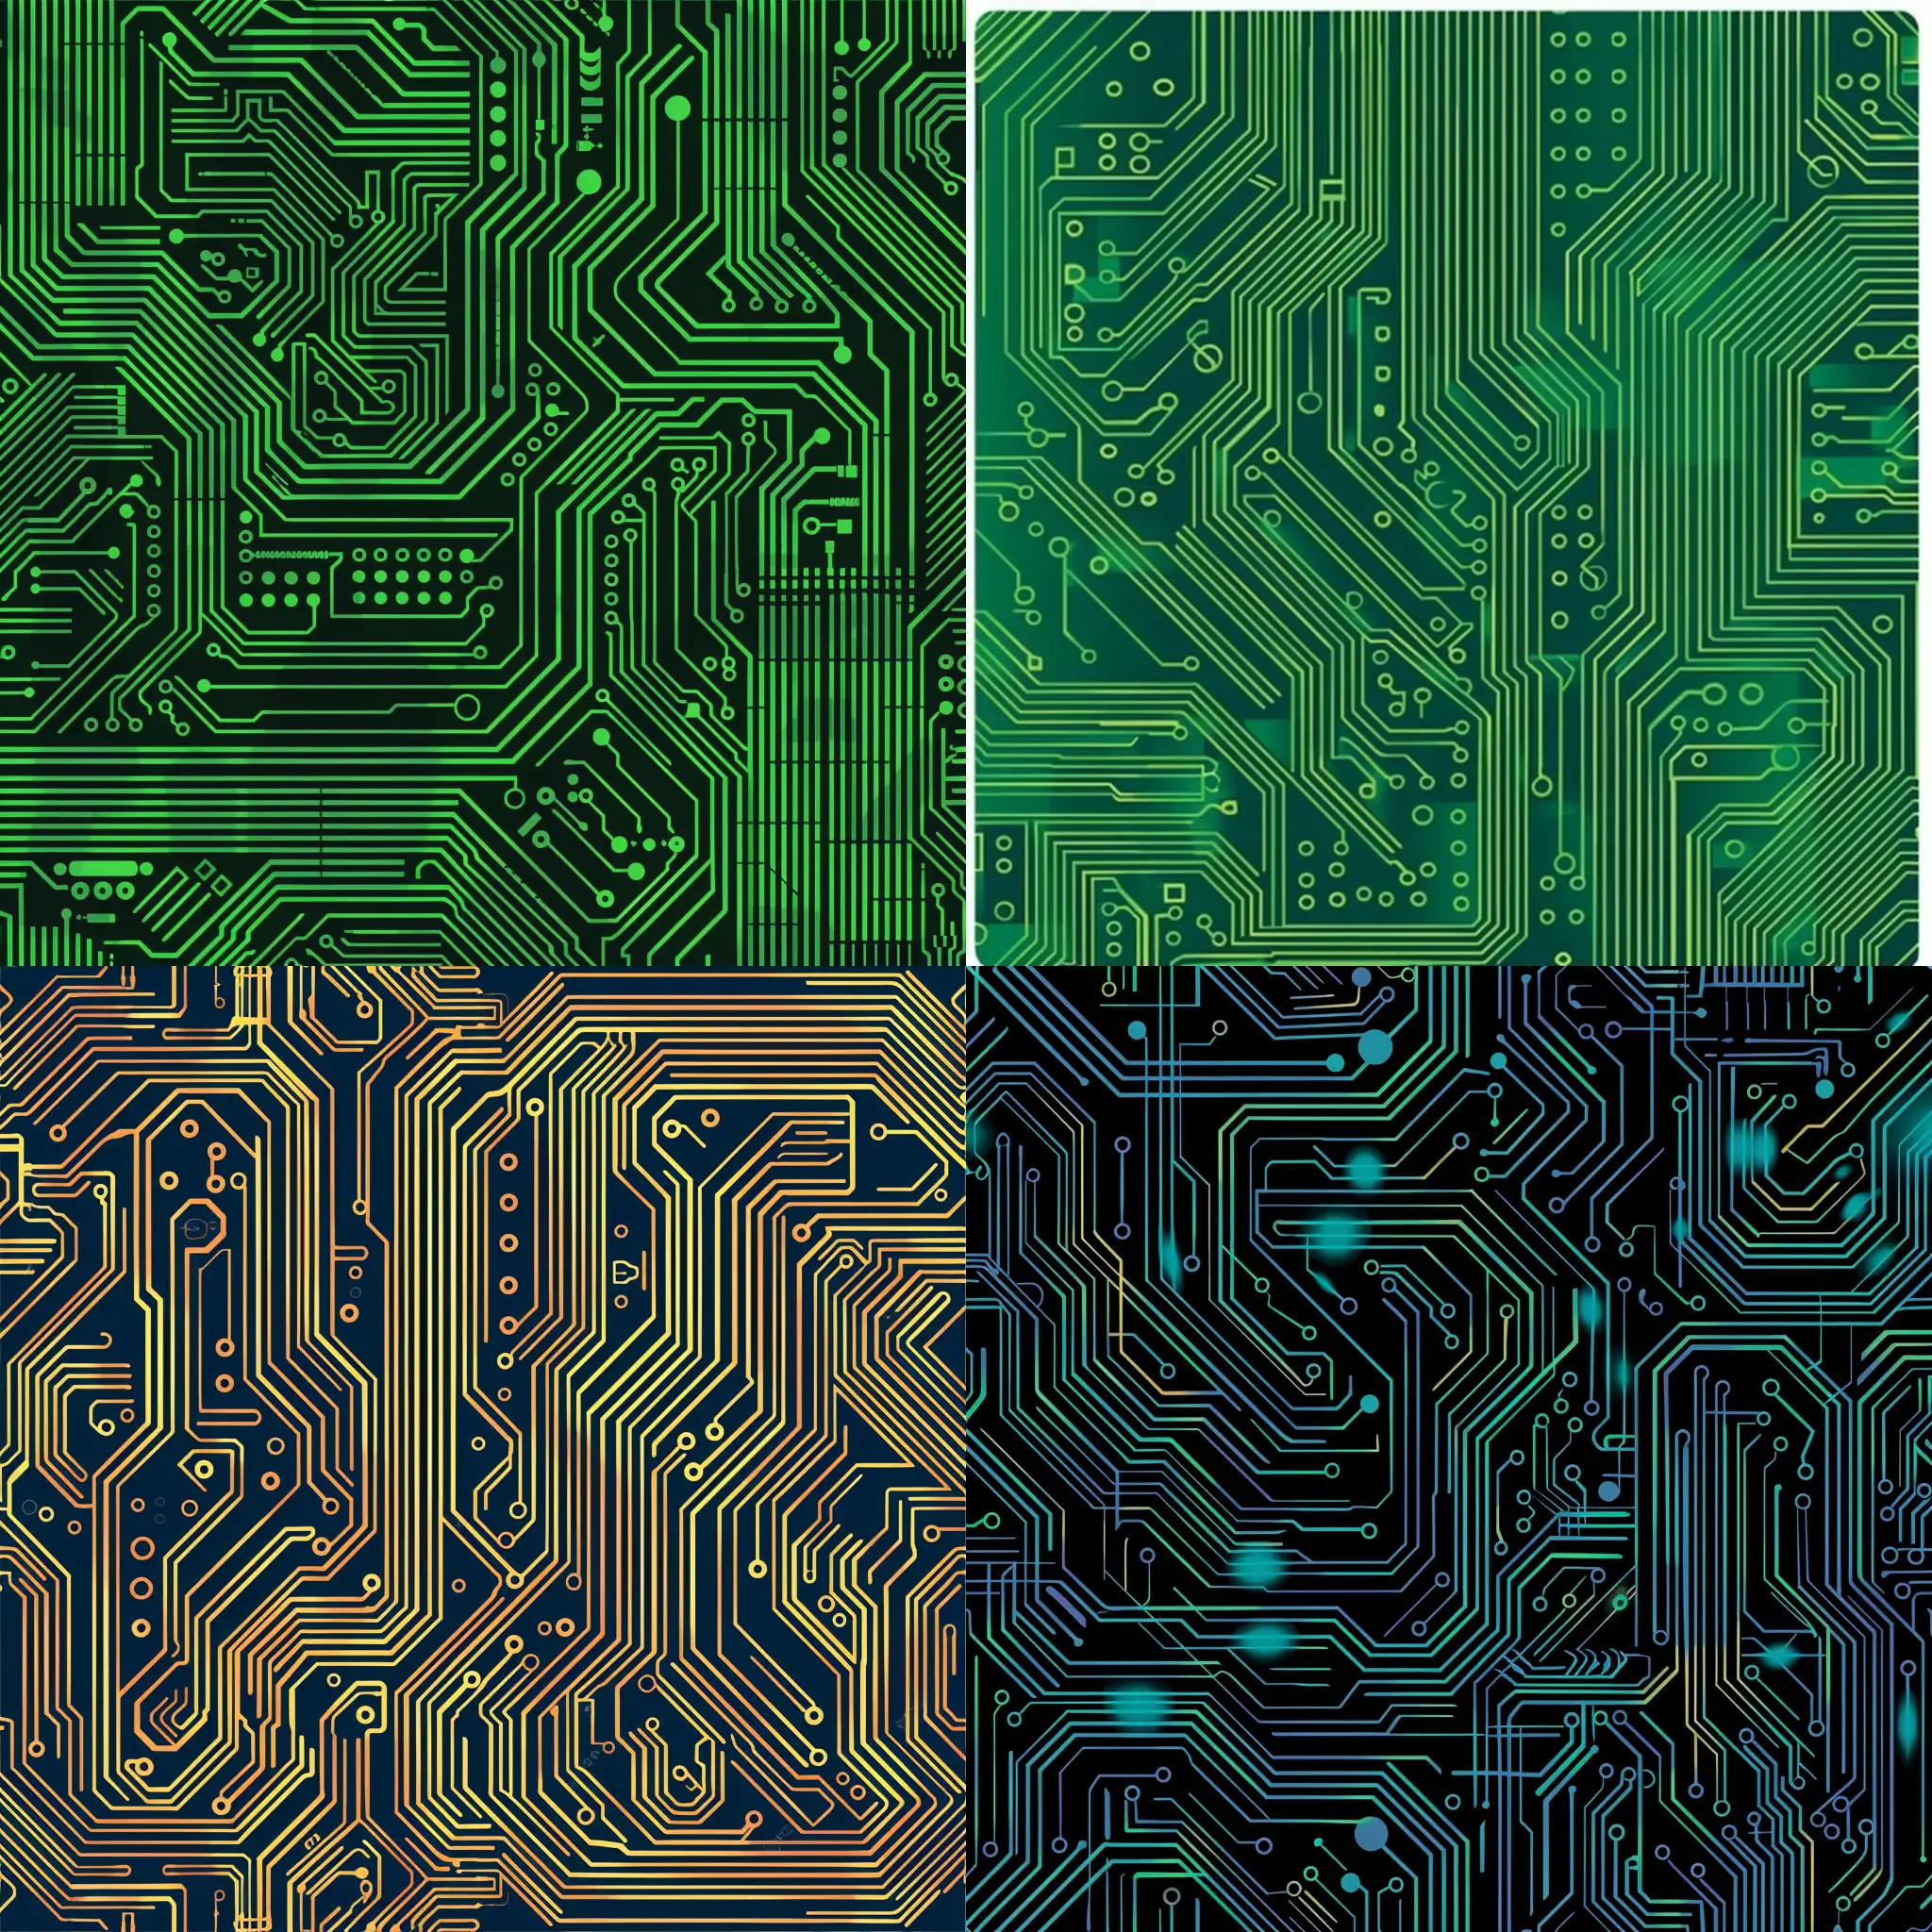 Generate a high-resolution vector graphic with a circuit board pattern. Use the color #EA843D as the primary color. The design should emphasize technology and AI, and be suitable for website backgrounds and product designs.
